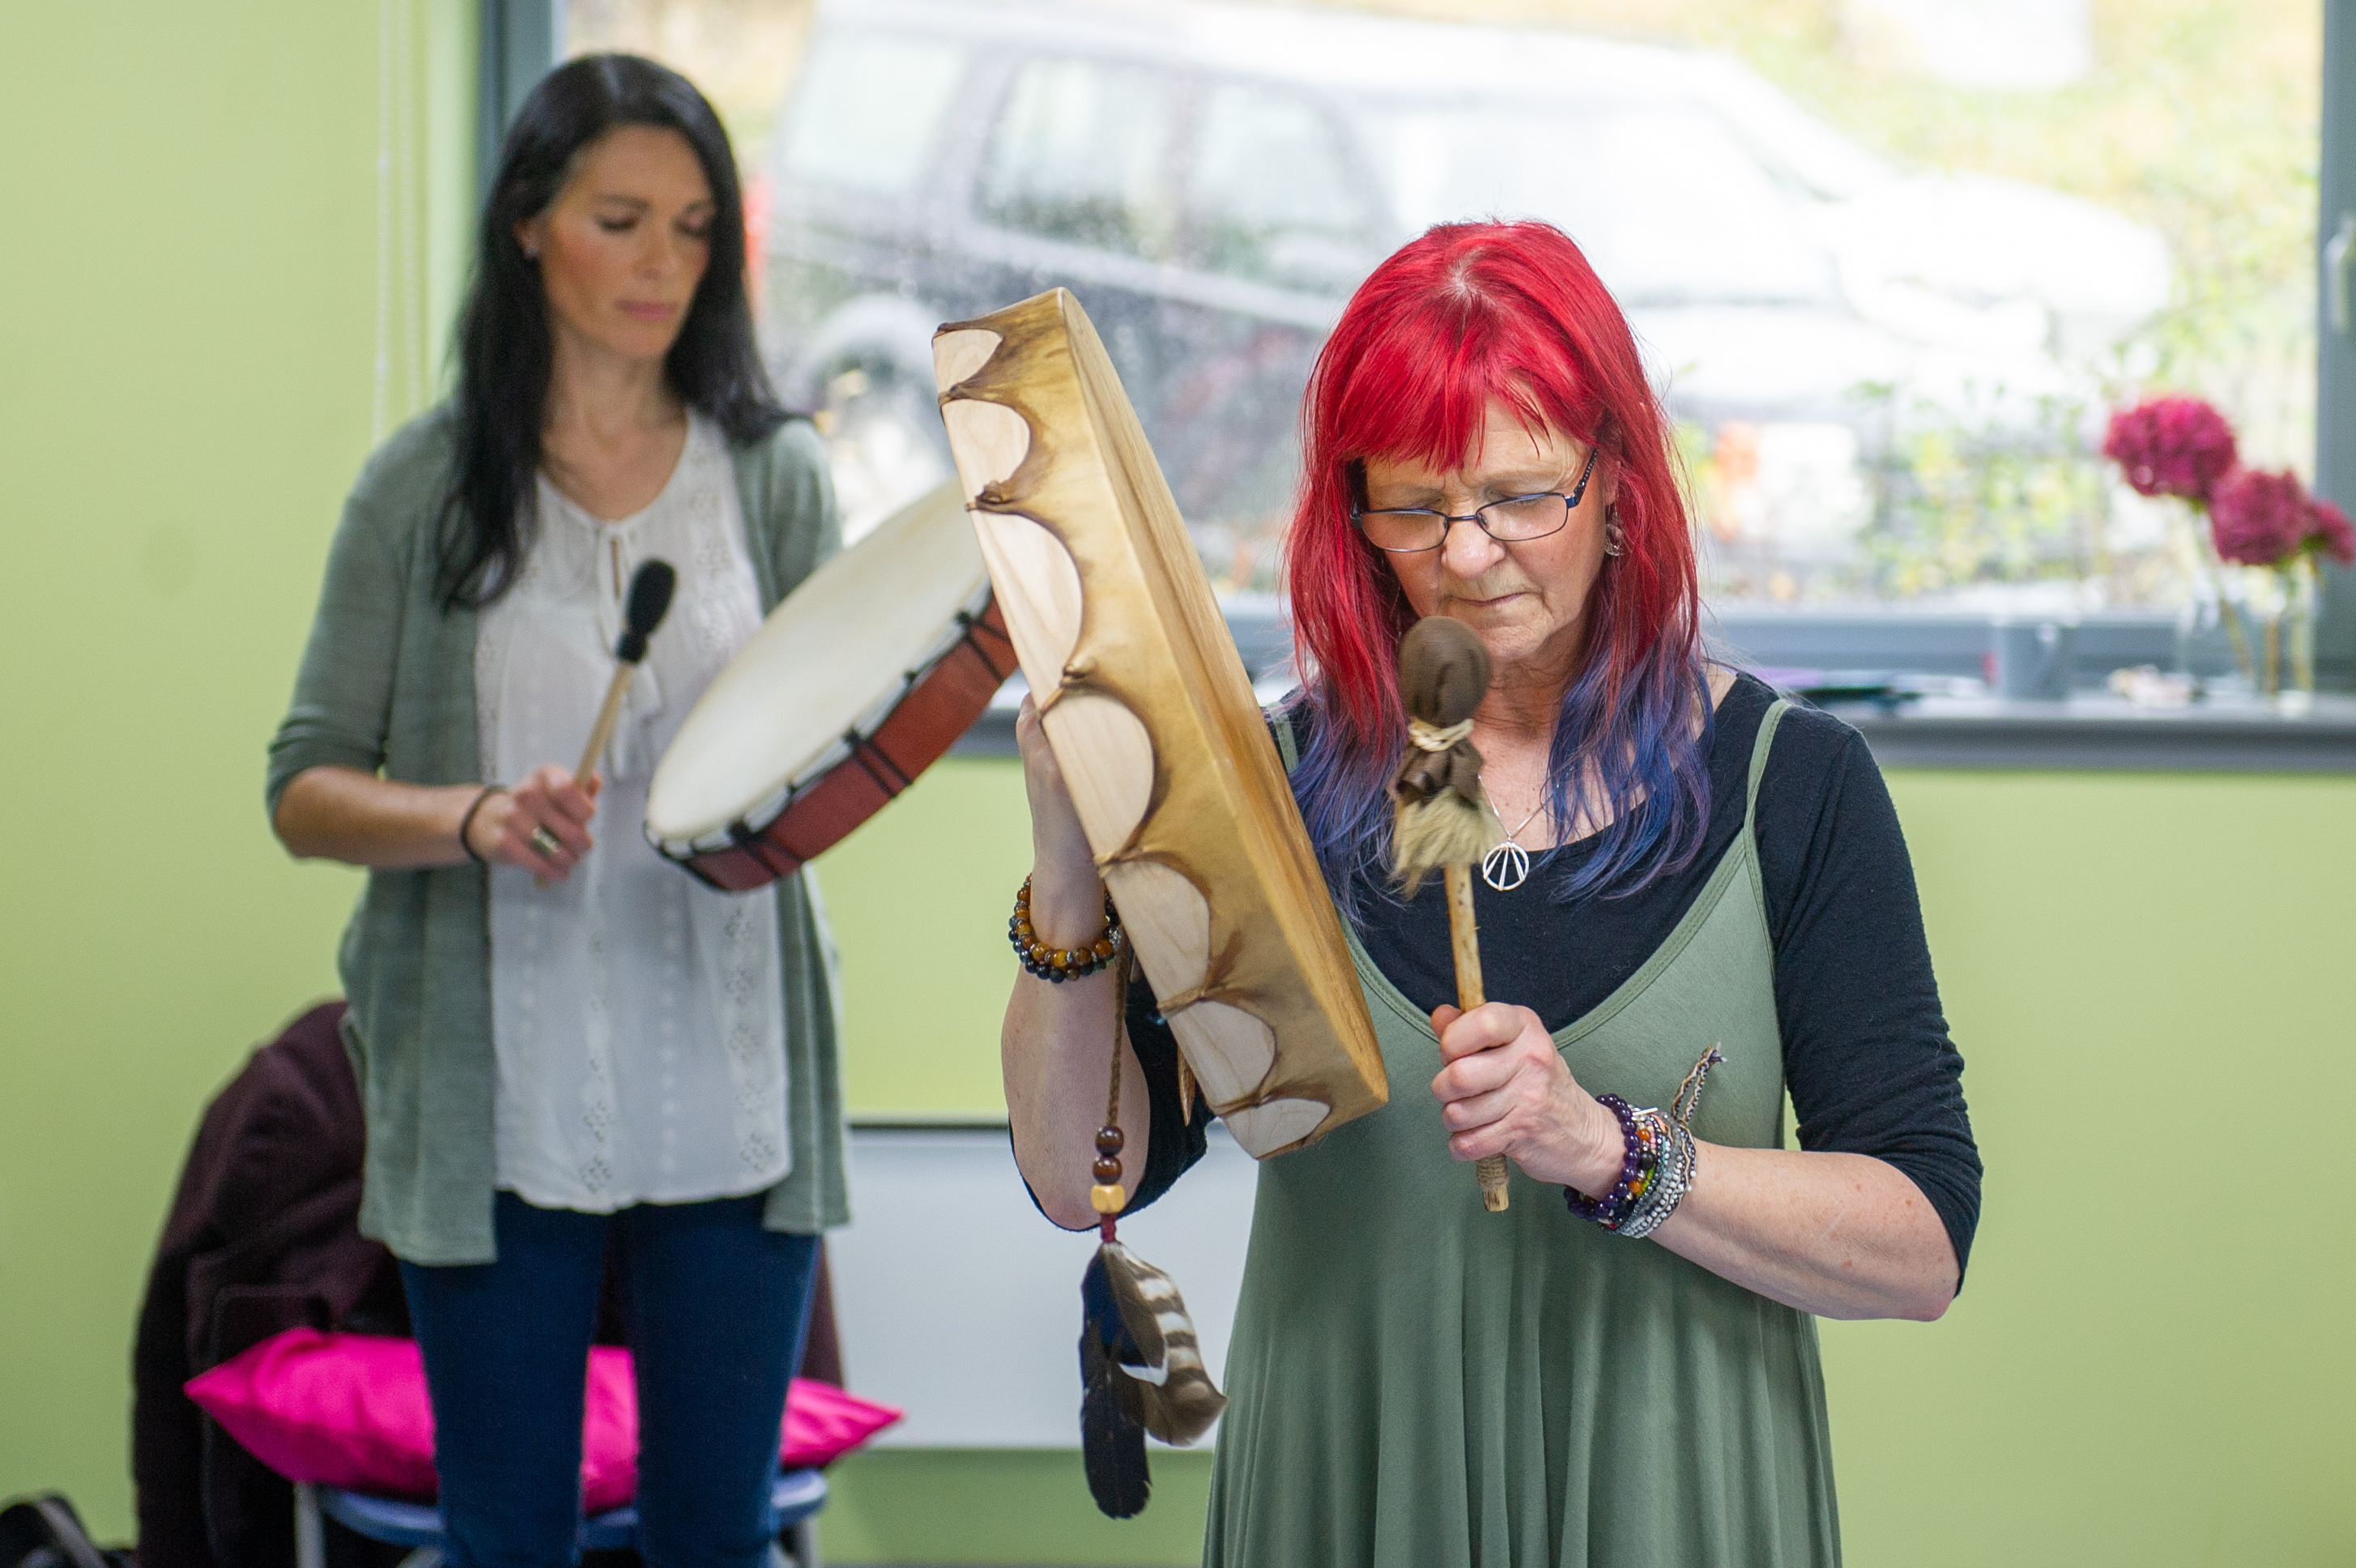 Gayle joins a shamanic drumming class led by Liz Harris at the Ecology Centre in Kinghorn.